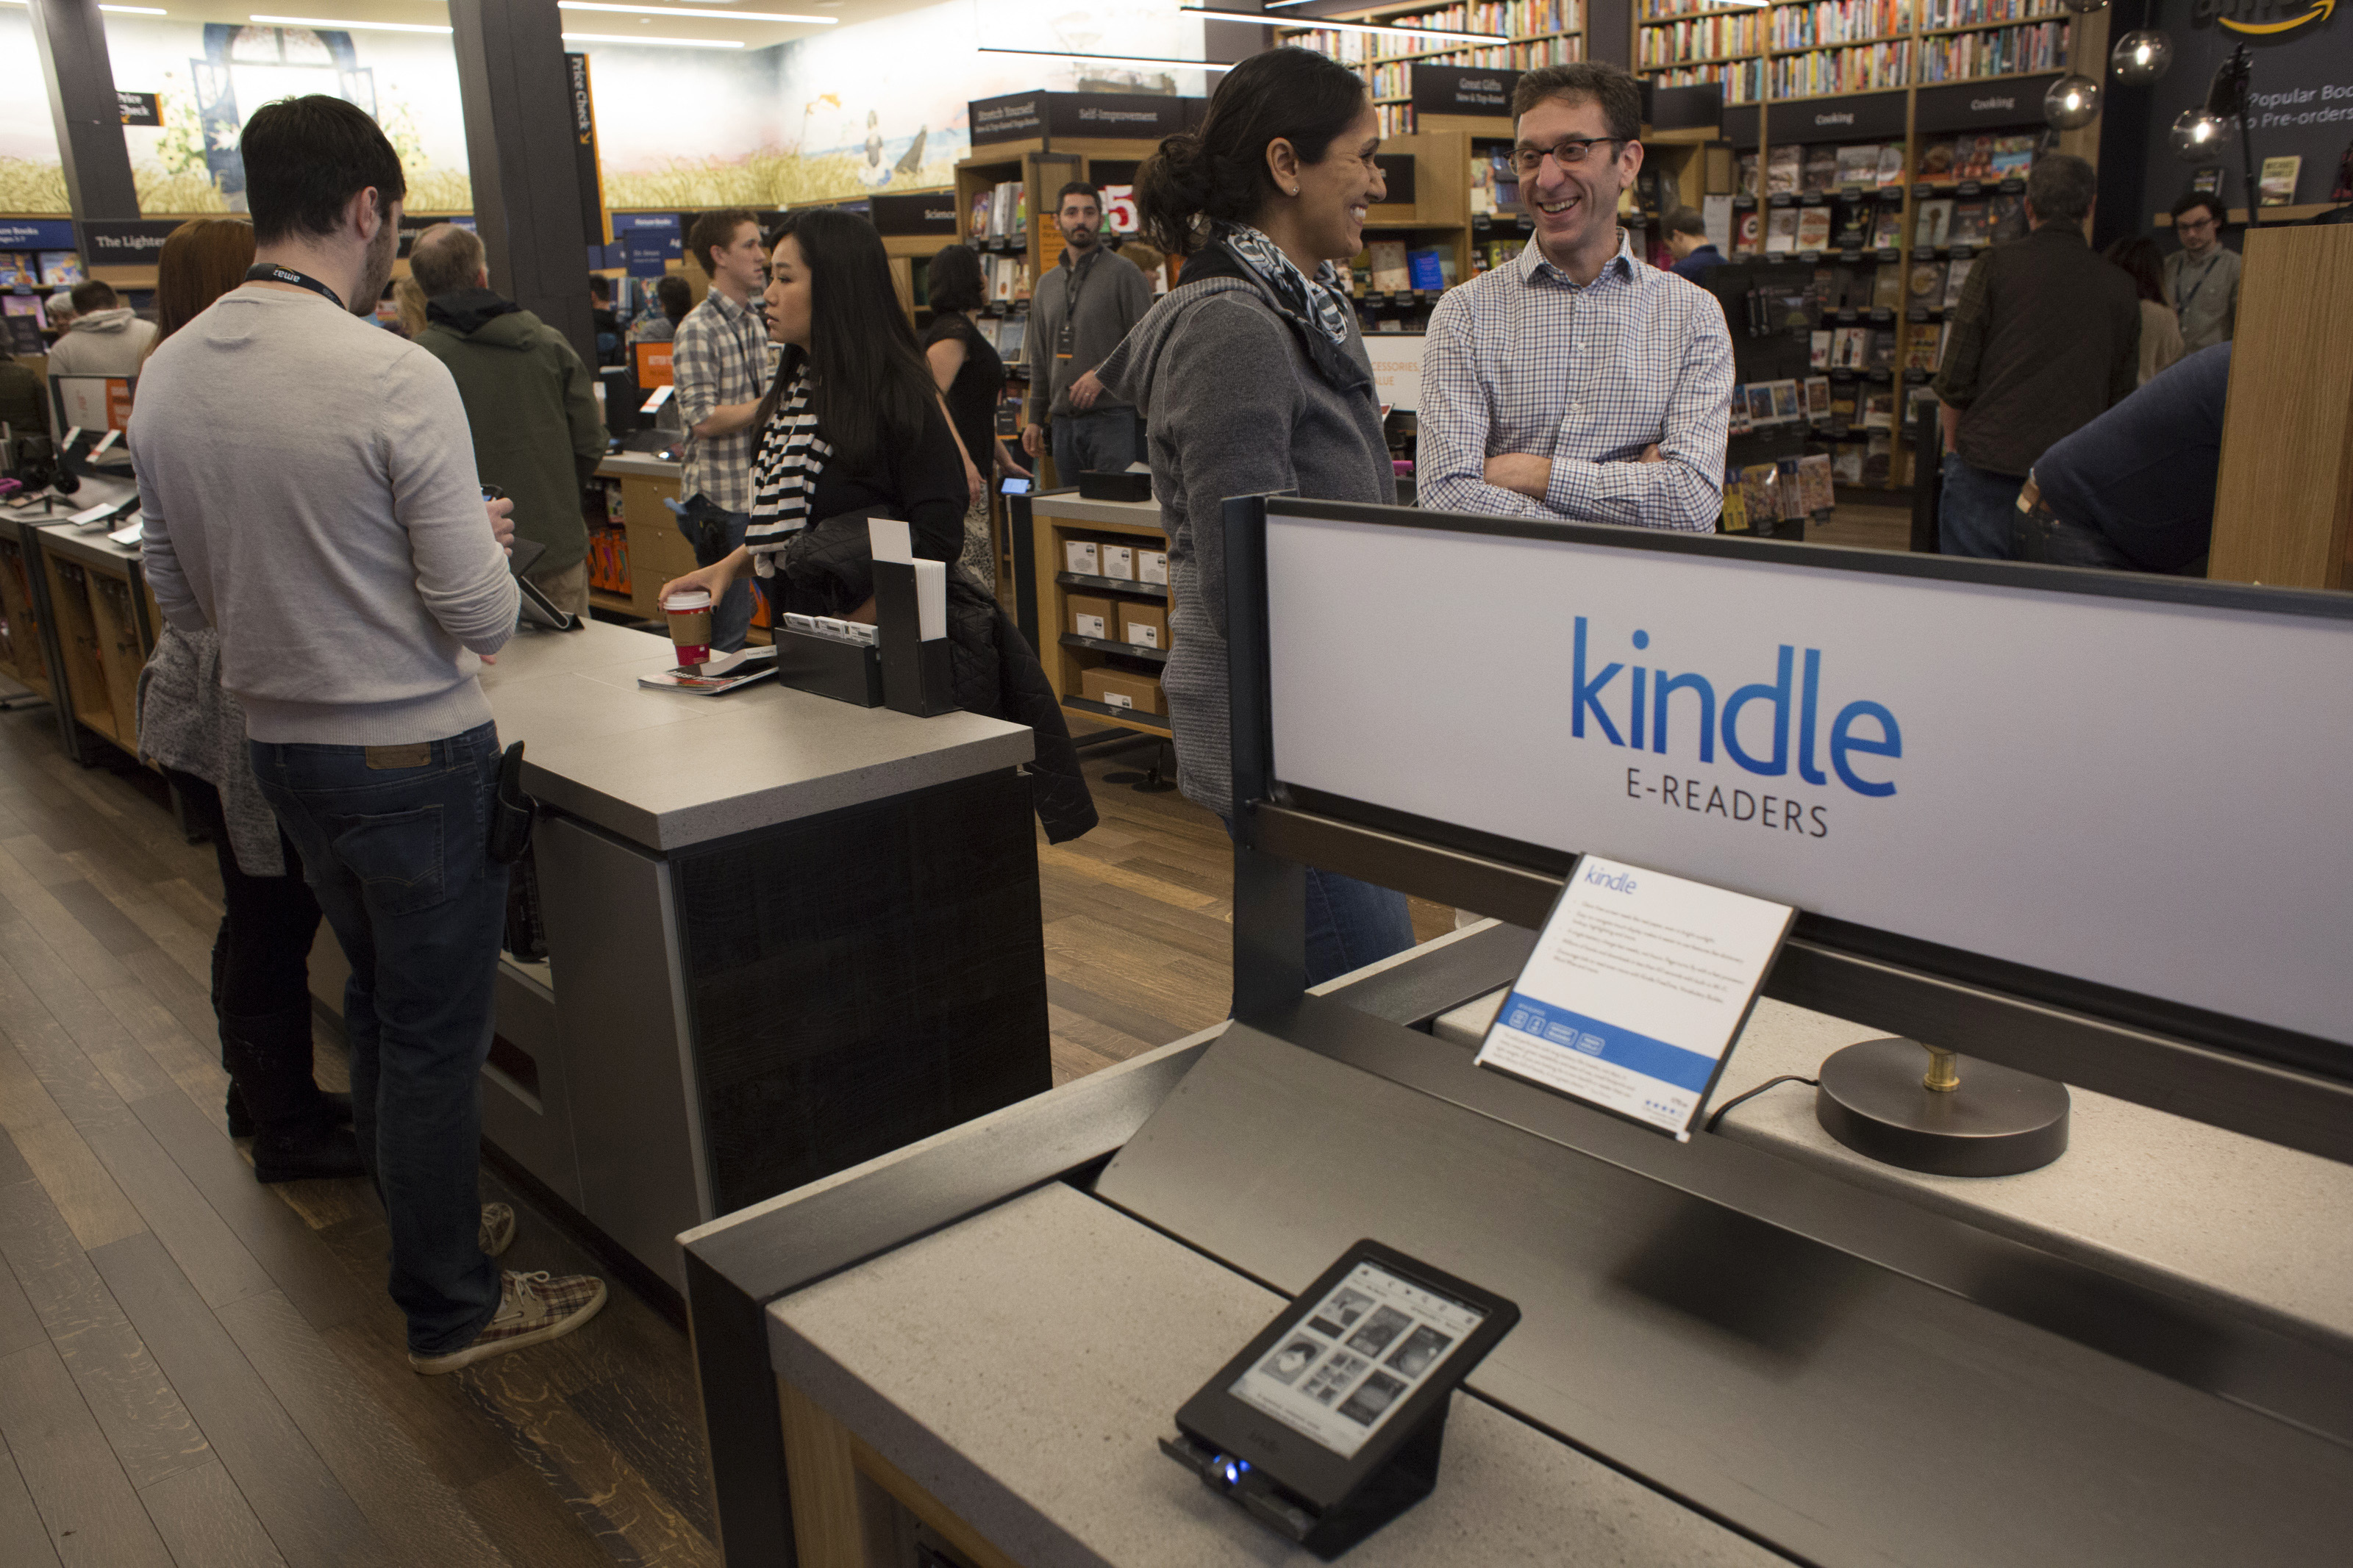 Customers shop at Amazon Books in Seattle, Washington, on Tuesday, Nov. 3, 2015. The online retailer Amazon.com Inc. opened its first brick-and-mortar location in Seattle's upscale University Village mall. Photographer: David Ryder/Bloomberg (David Ryder—© 2015 Bloomberg Finance LP)